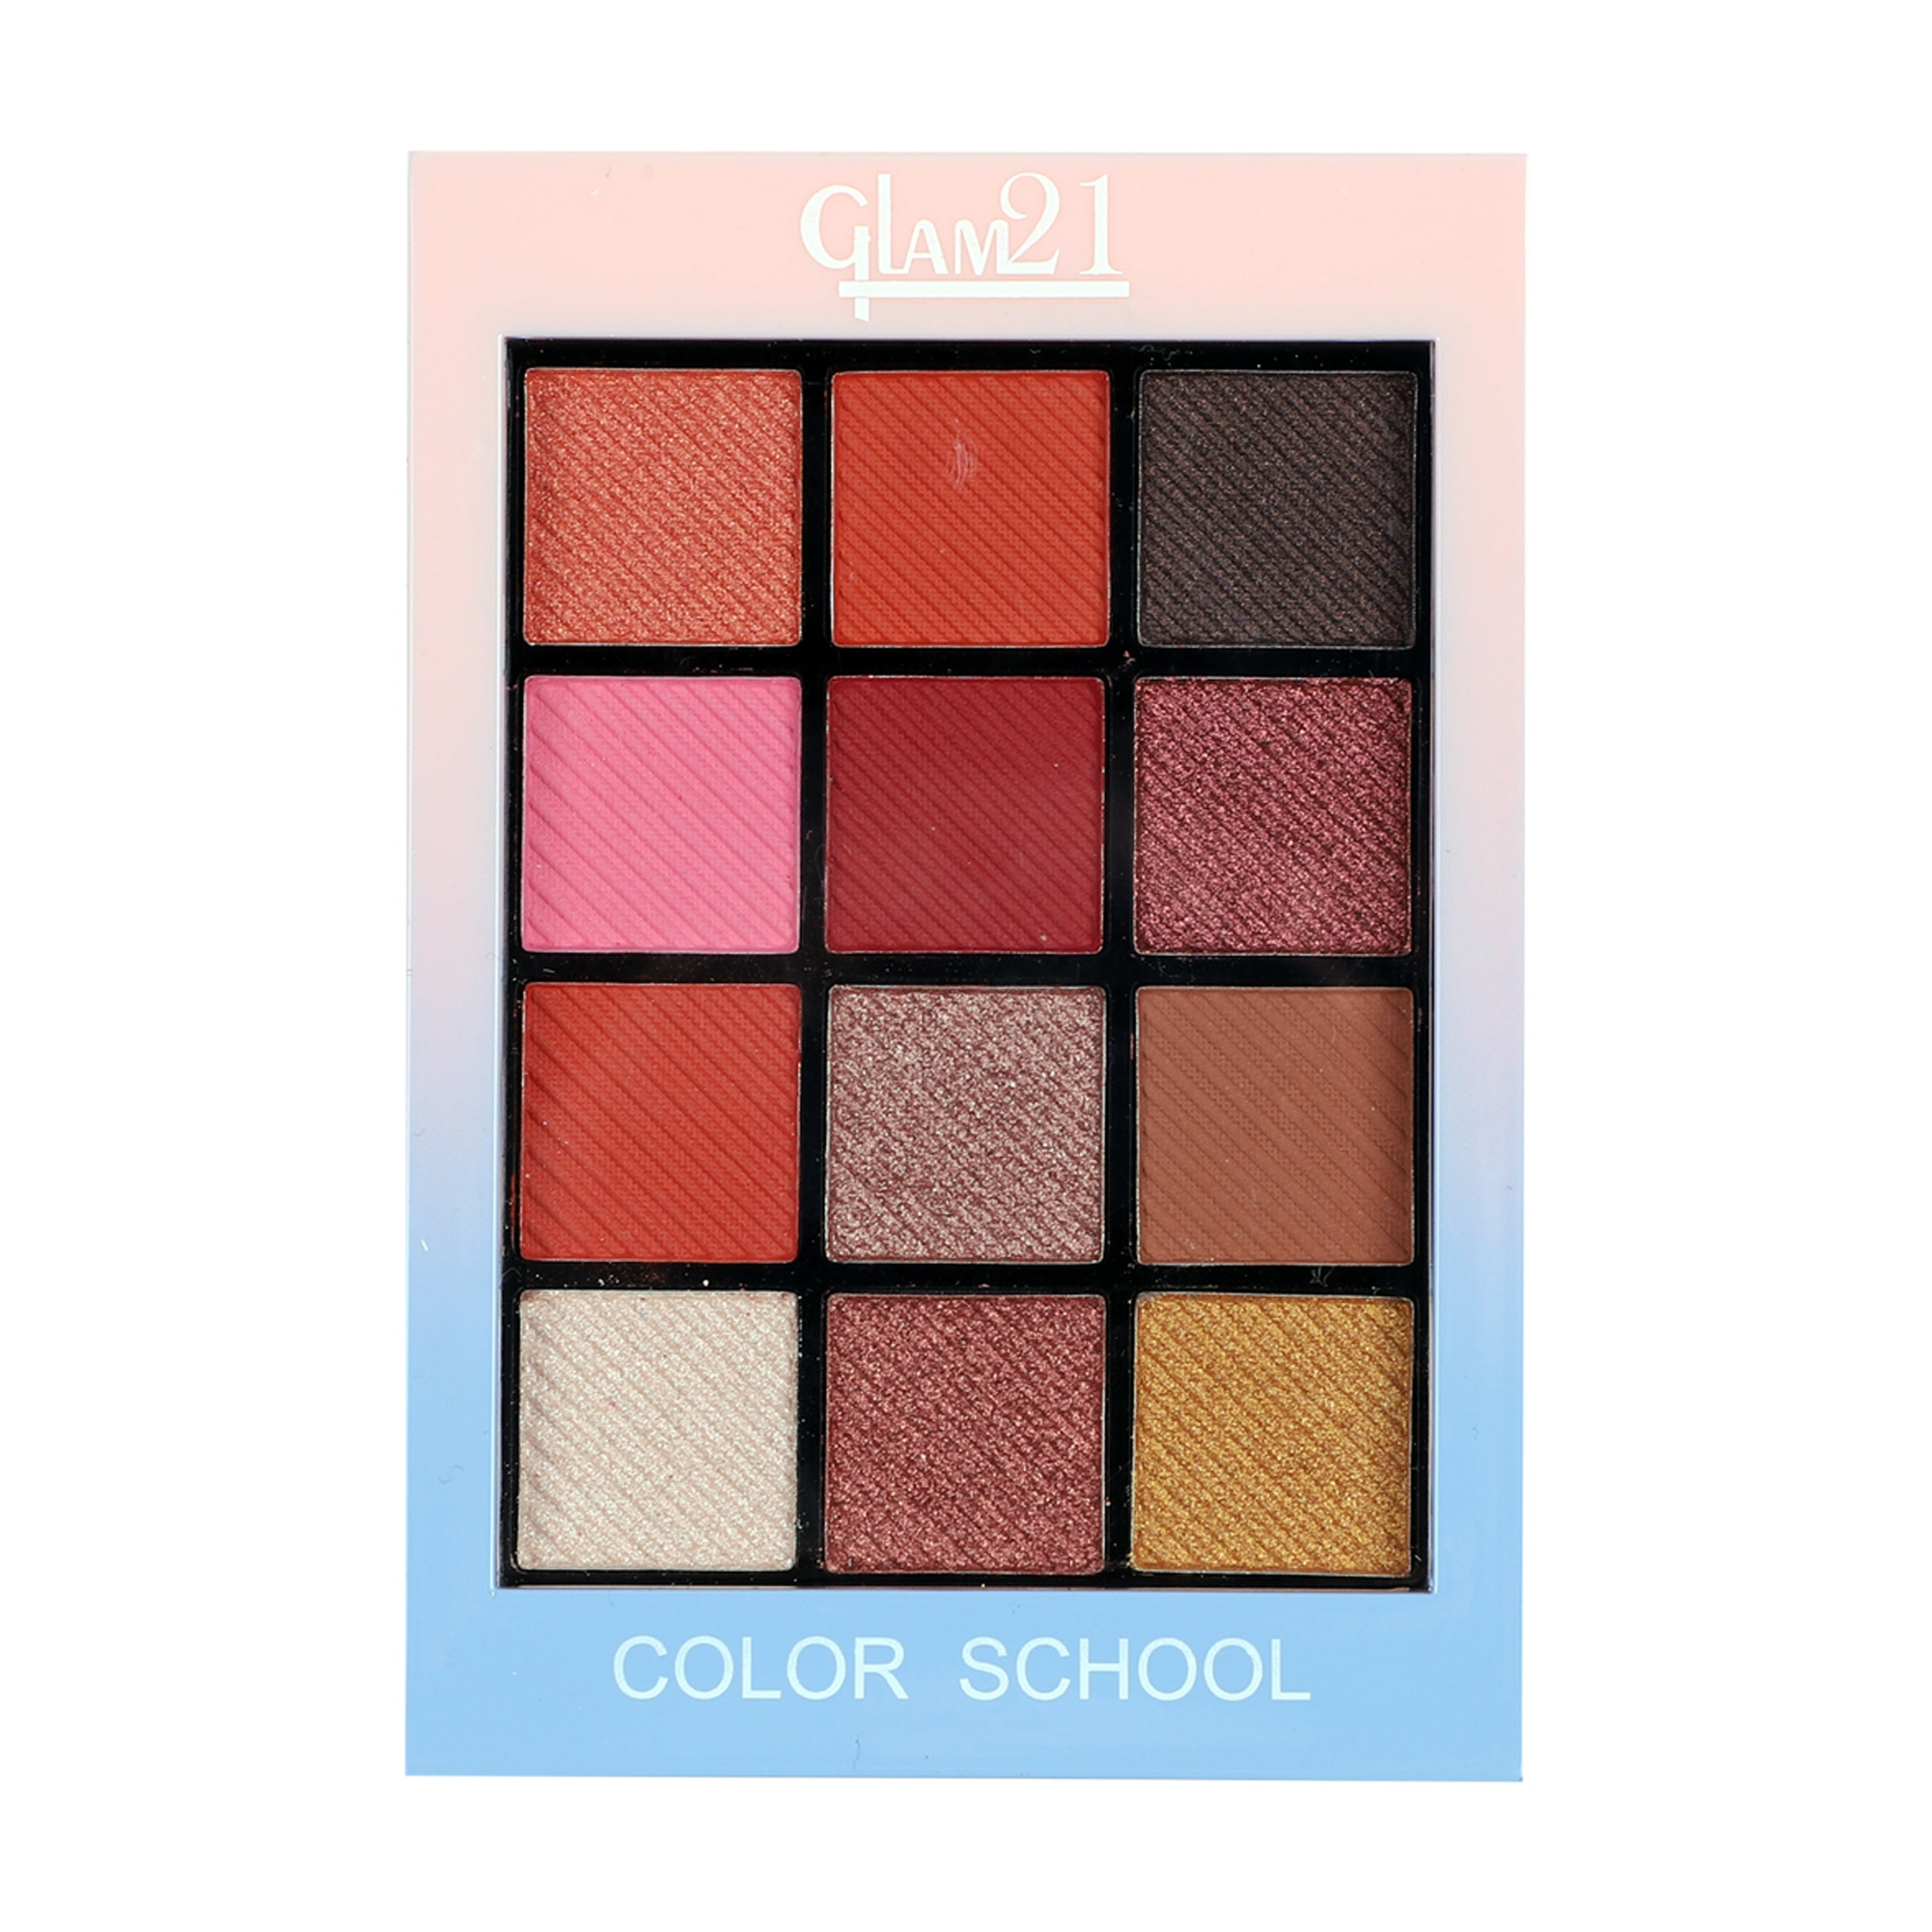 Glam21 Color School Eyeshadow Palette 12 Versatile Colors Long-Staying|Sparkles & Matte 10 g (Shade-01)